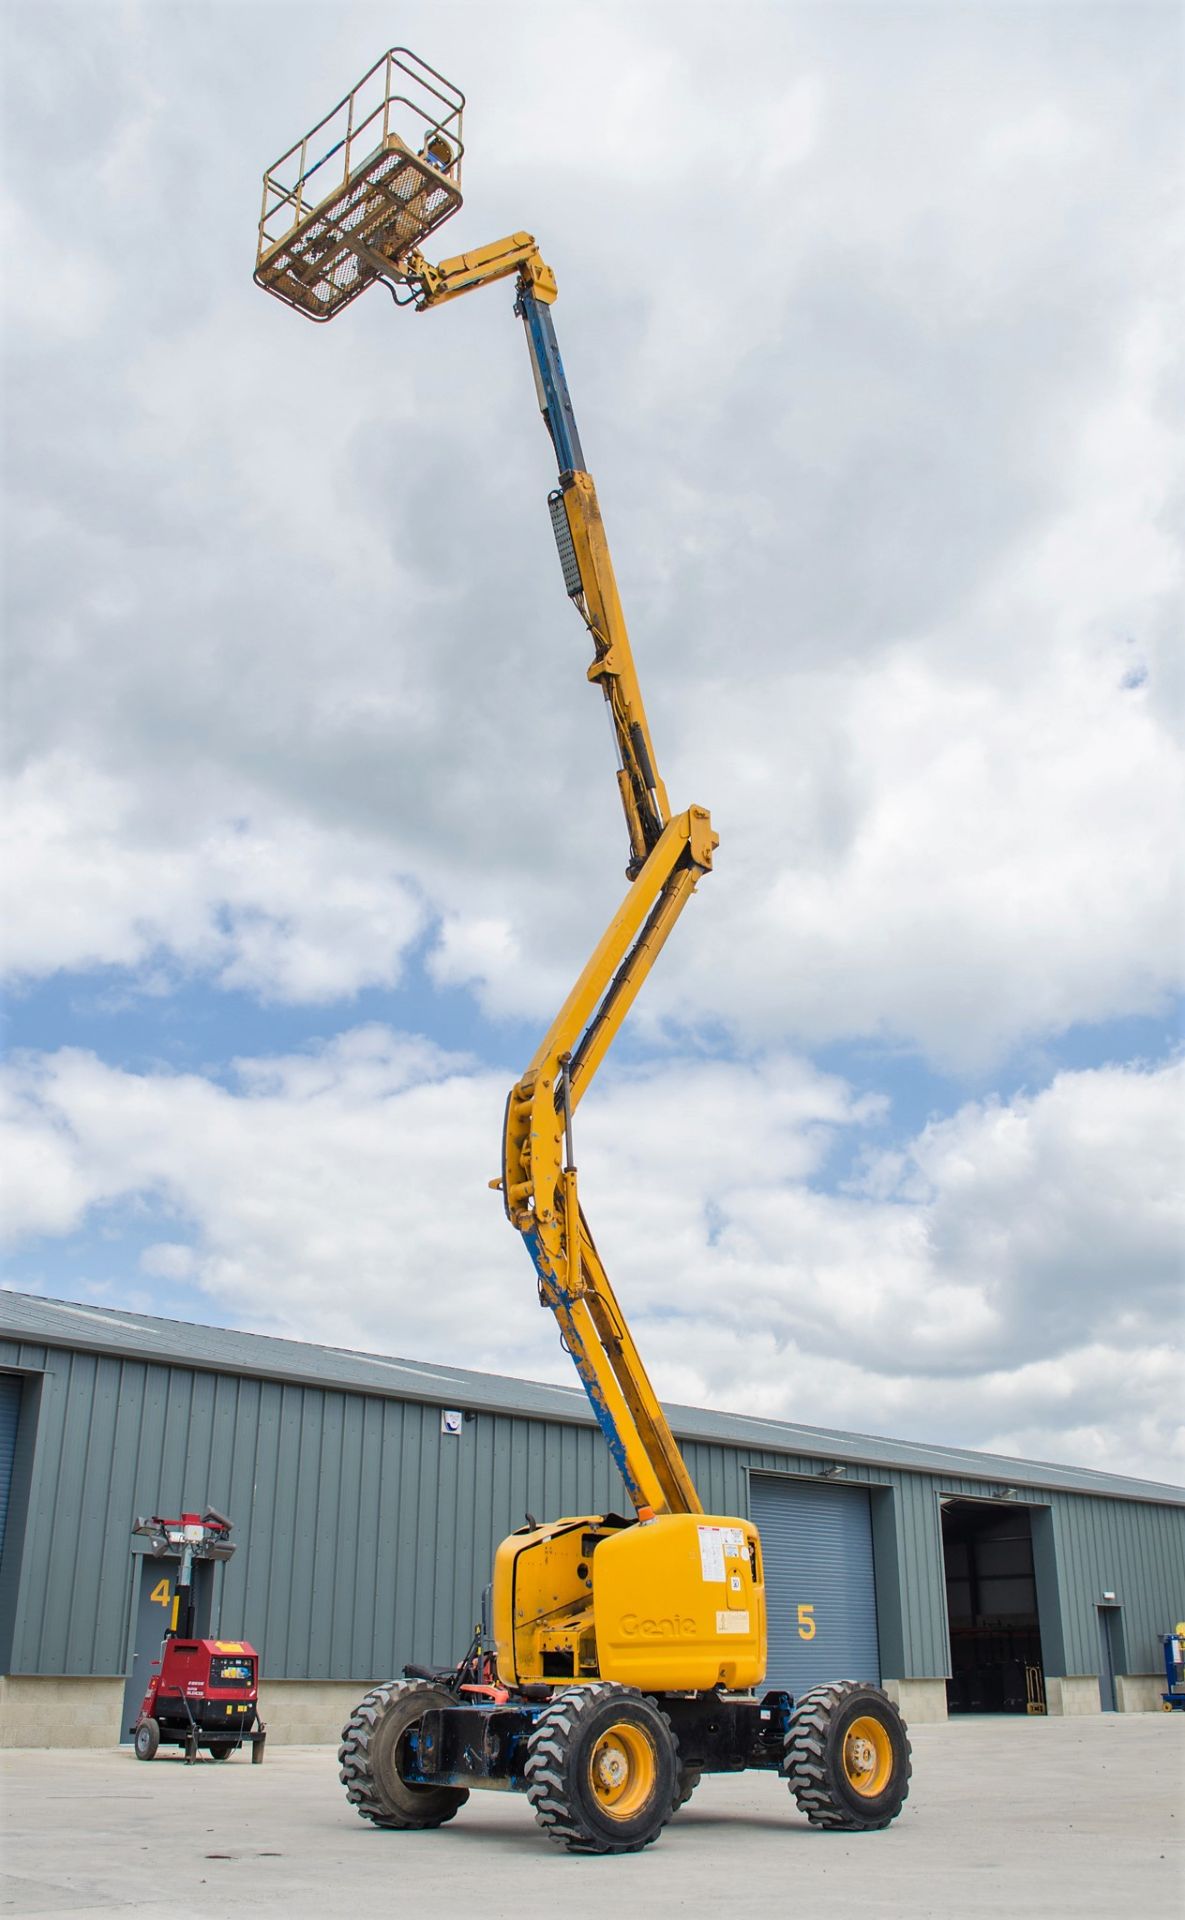 Genie Z45/25 diesel driven 45 ft boom lift access platform Year: 2001 S/N: 18365 Recorded Hours: - Image 9 of 19